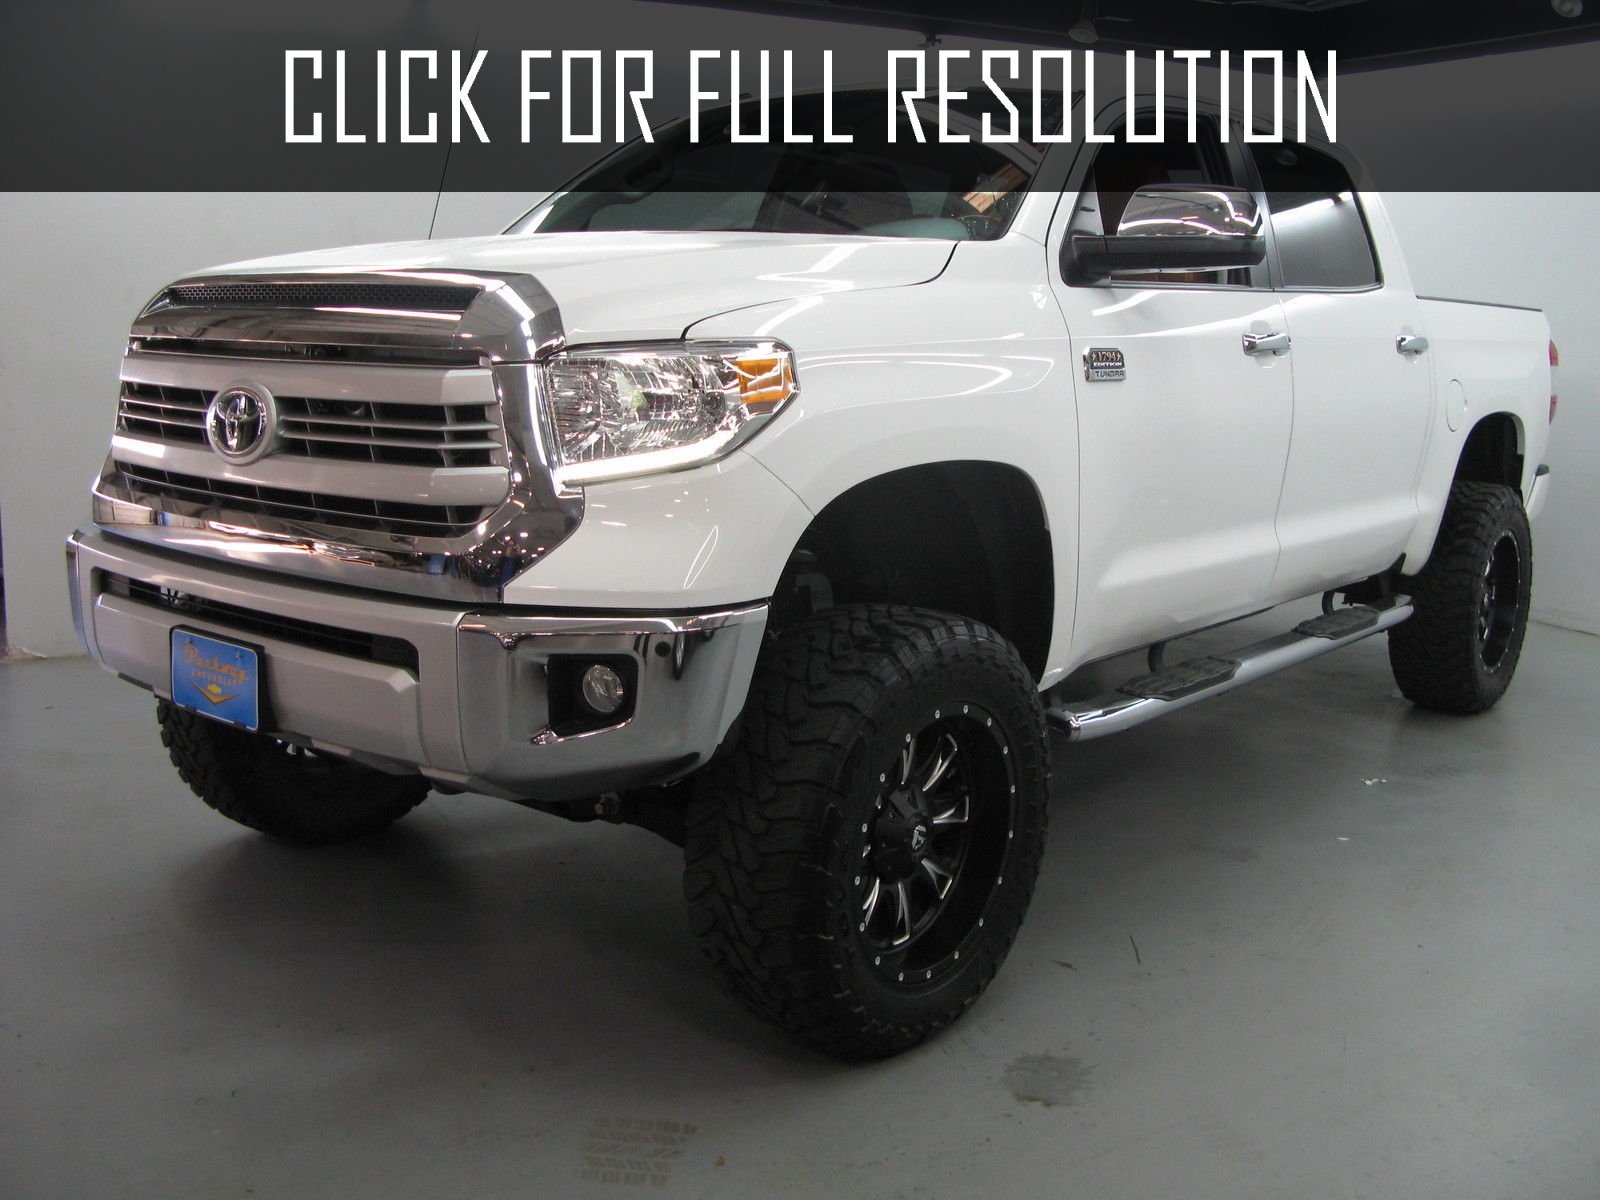 Toyota Tundra 1794 Edition Lifted - amazing photo gallery, some